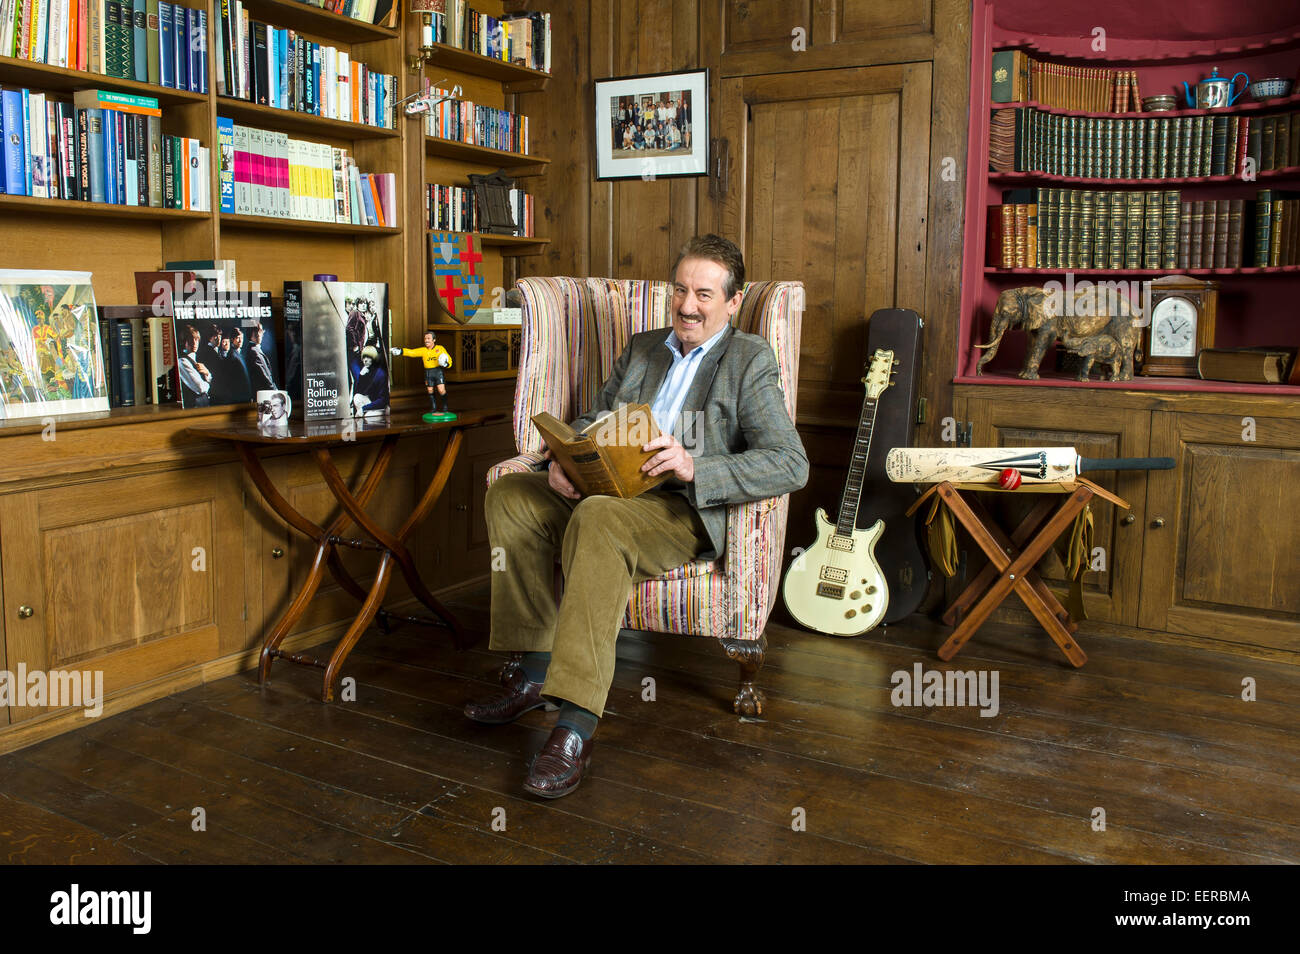 Actor John Challis pictured at home in Shropshire. He played 'Boycie' a used car salesman in the drama 'Only fools and horses' Stock Photo